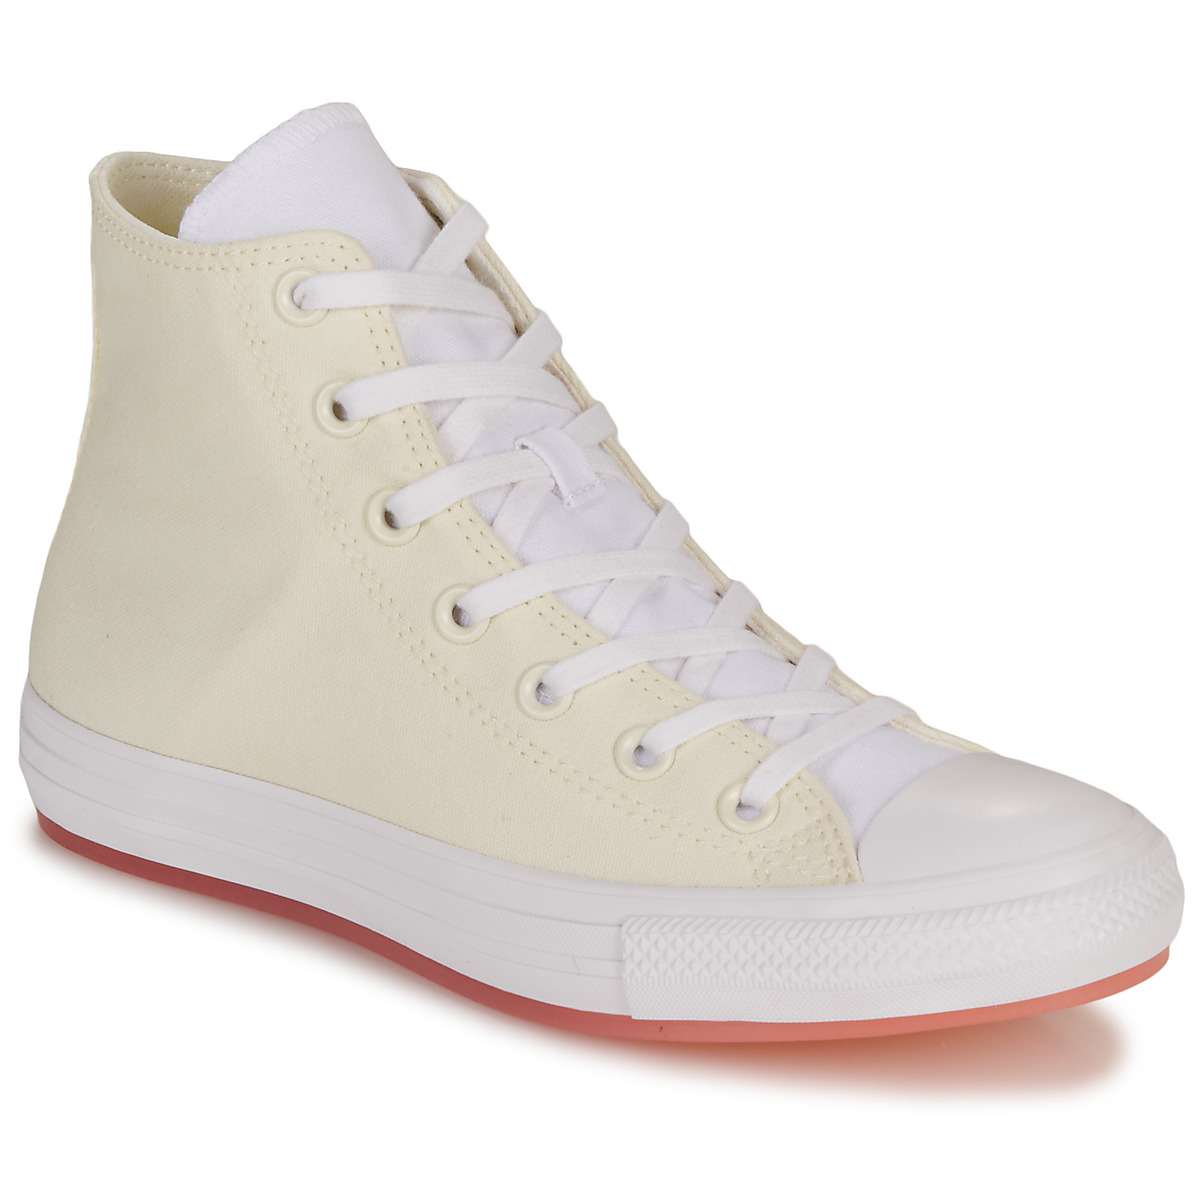 Converse Blanc / Beige CHUCK TAYLOR ALL STAR MARBLED-EGRET/CHEEKY CORAL/LAWN FLAMINGO bWnJo8hz